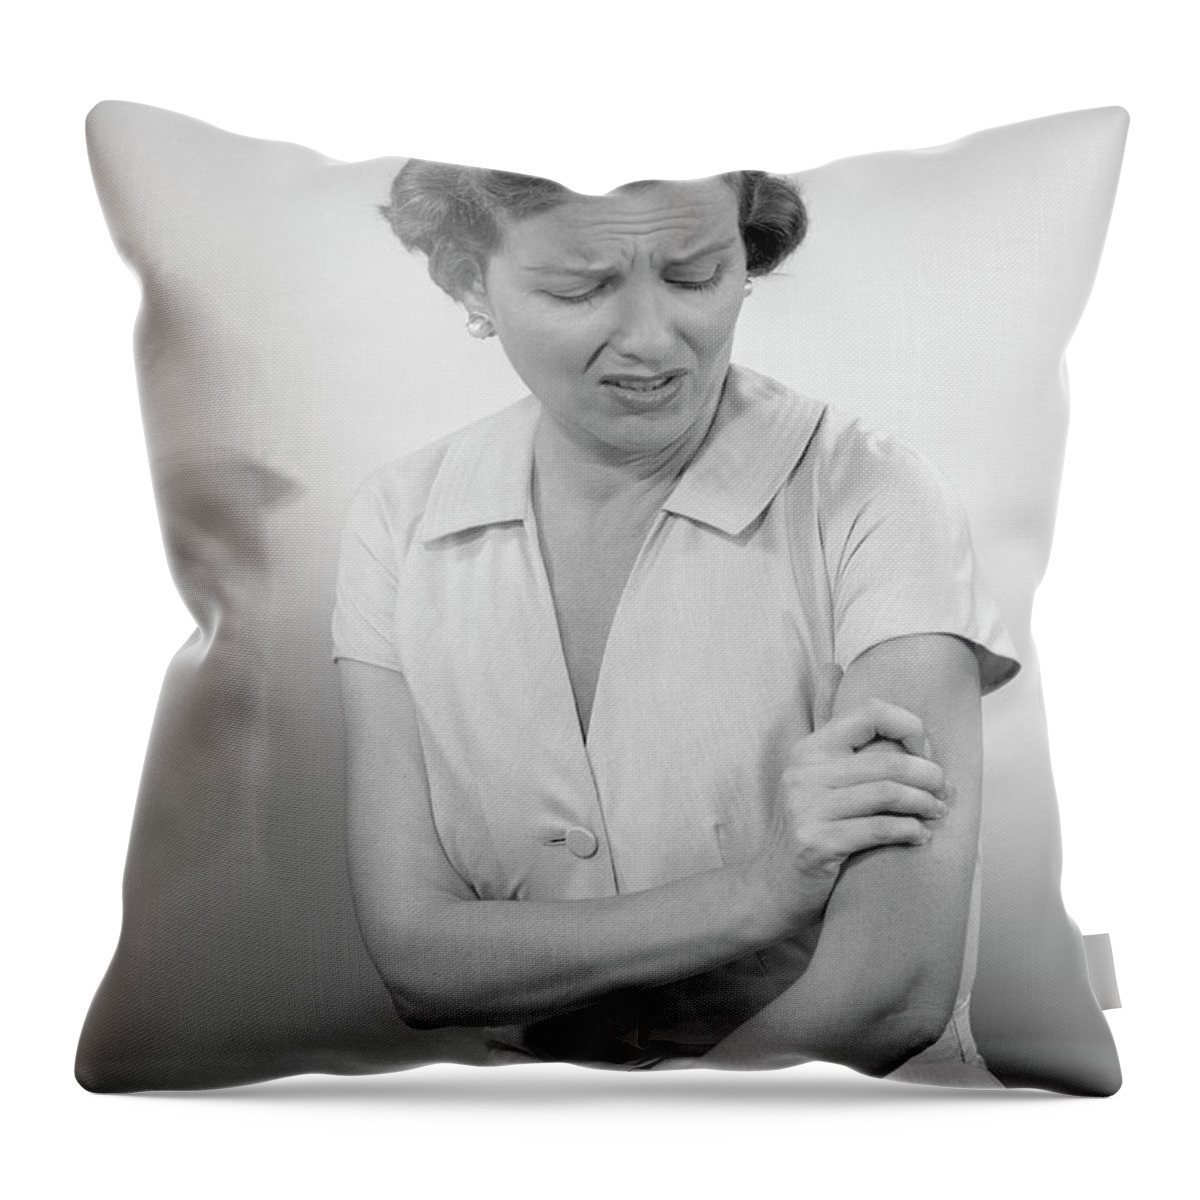 People Throw Pillow featuring the photograph Woman Massaging Arm by George Marks